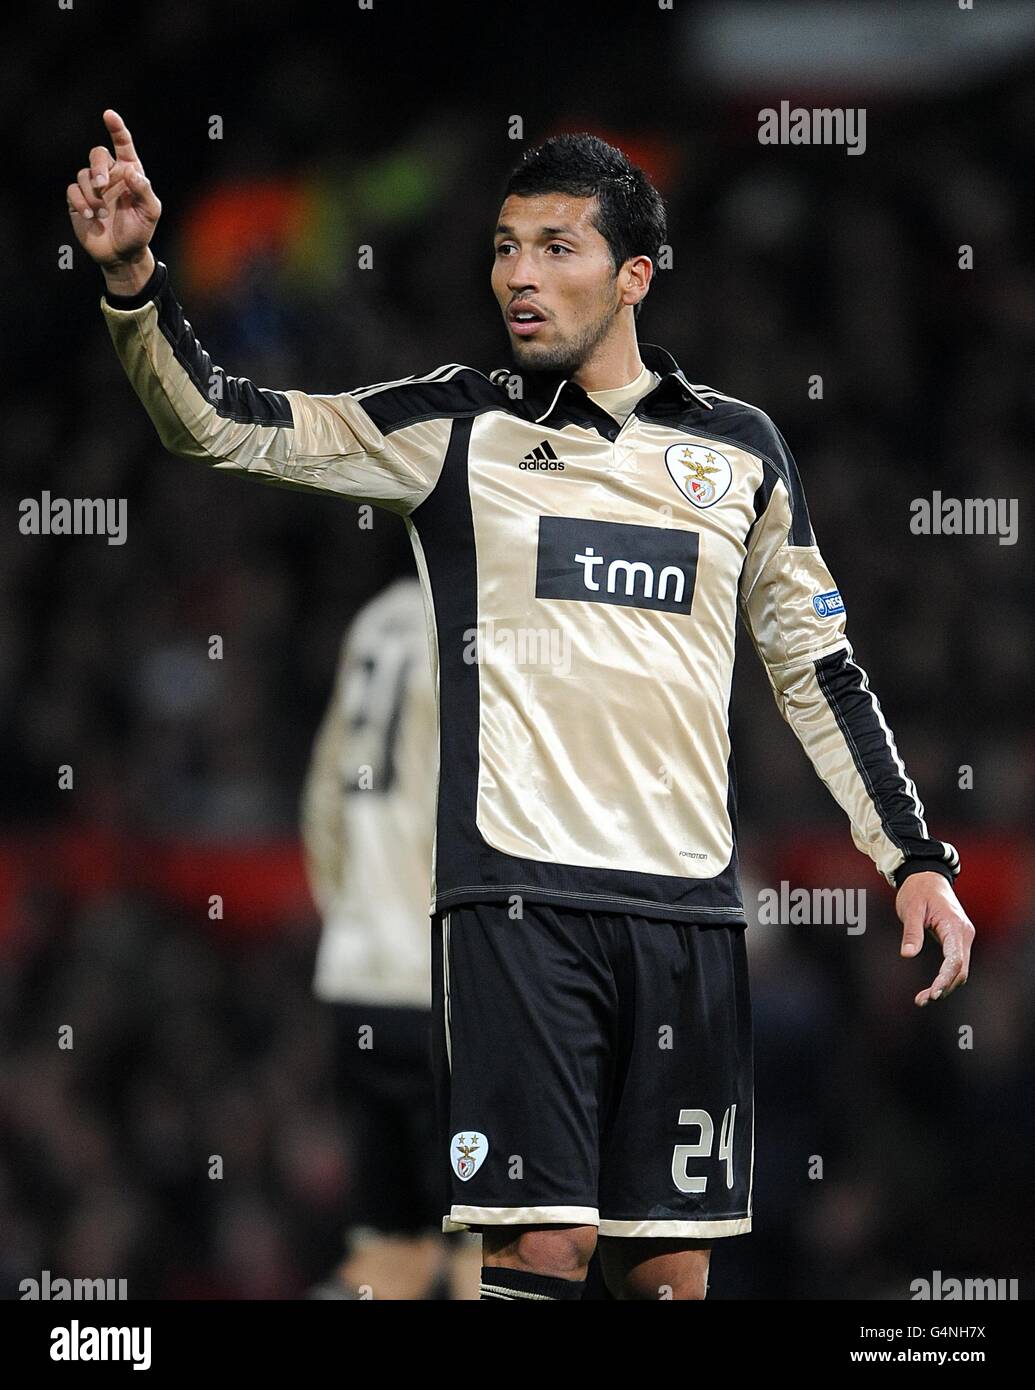 Soccer - UEFA Champions League - Group C - Manchester United v Benfica - Old Trafford. Ezequiel Garay, Benfica Stock Photo